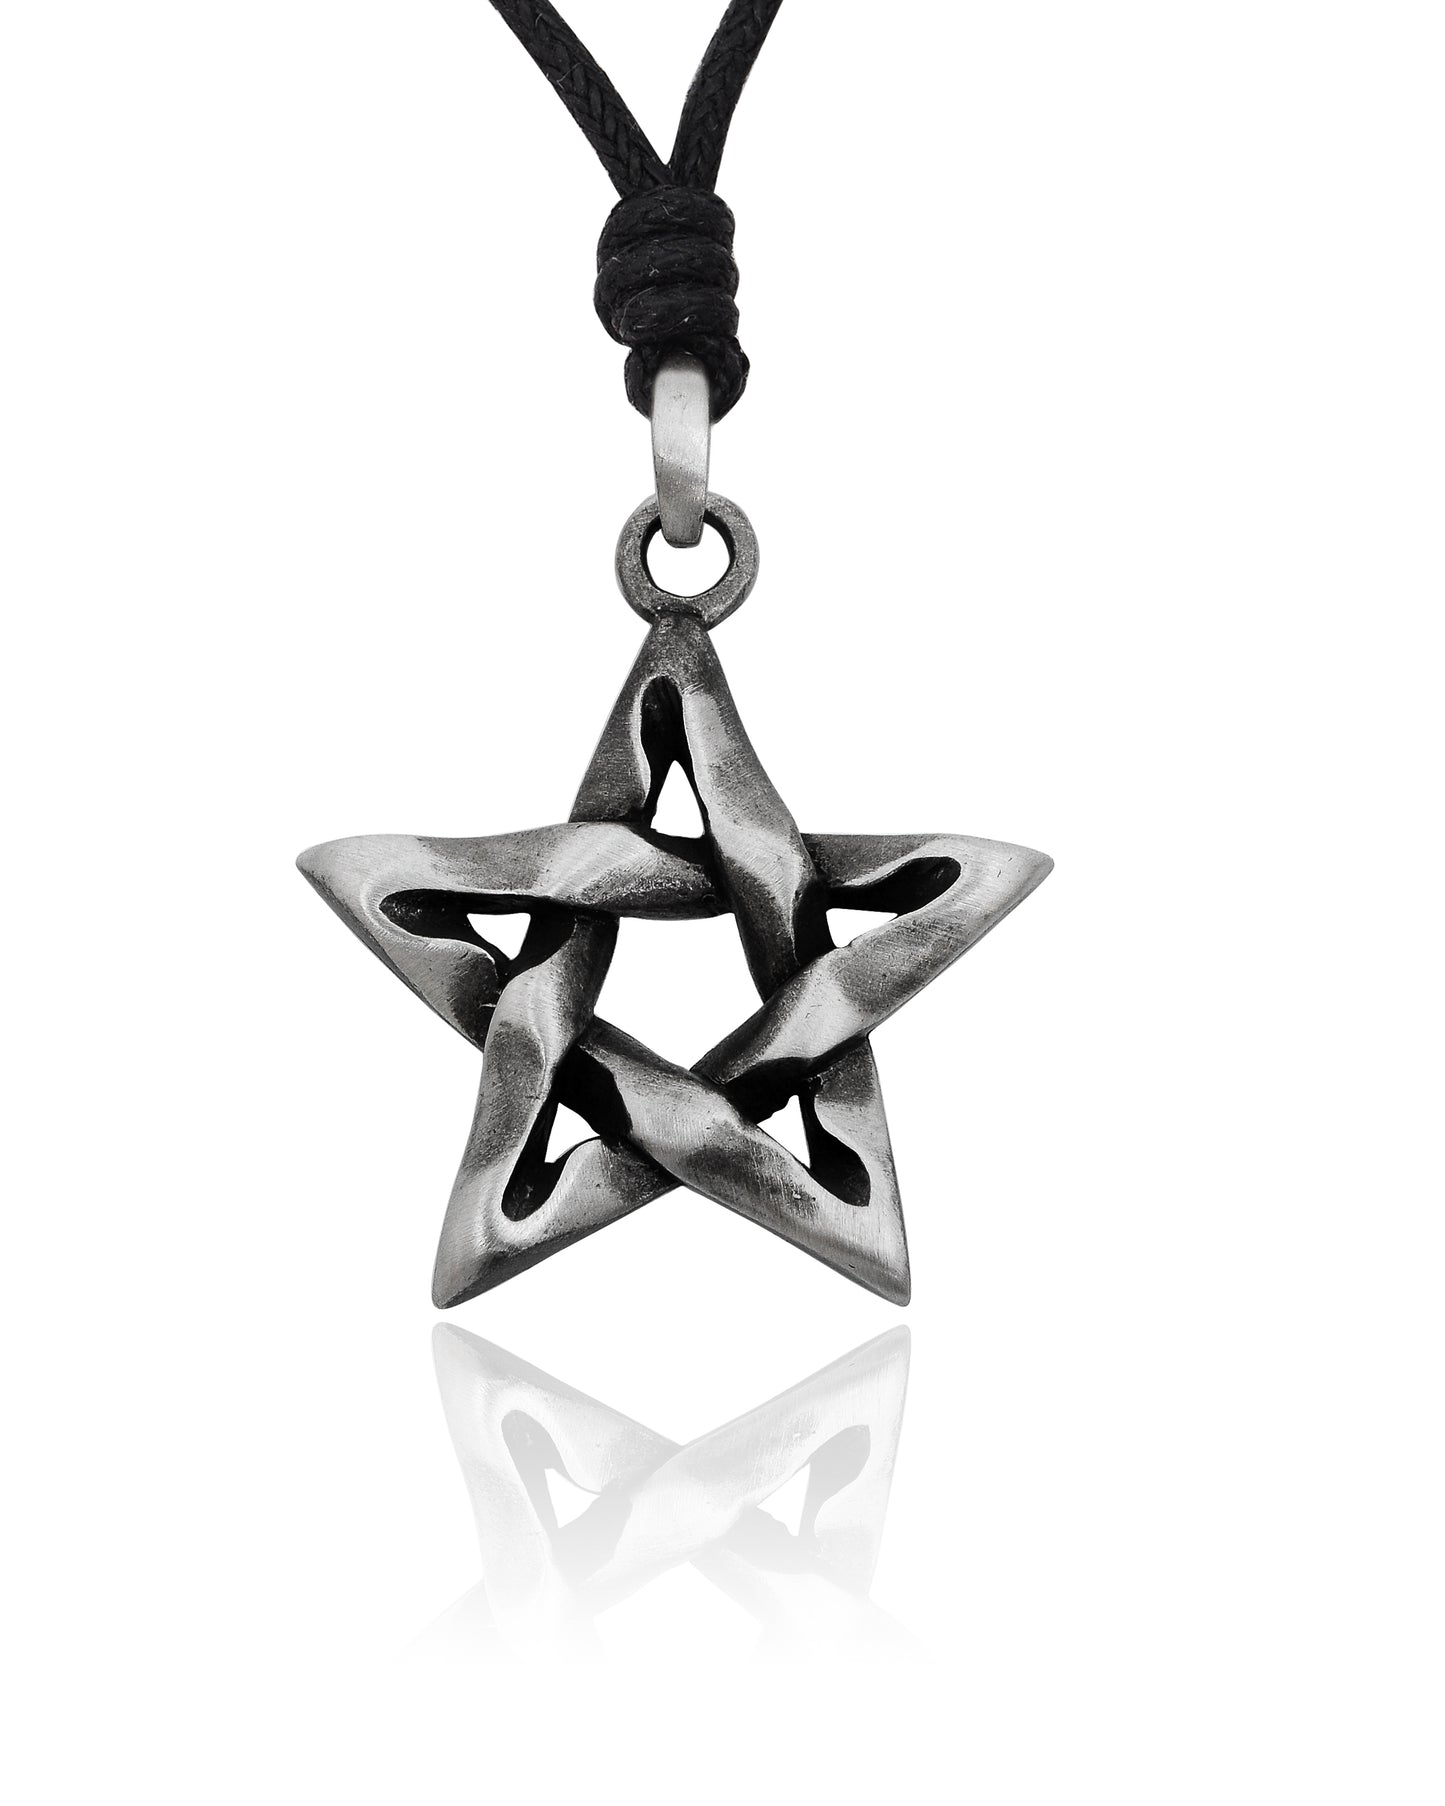 Flawless Pentagram 5-pointed Star Silver Pewter Charm Necklace Pendant Jewelry